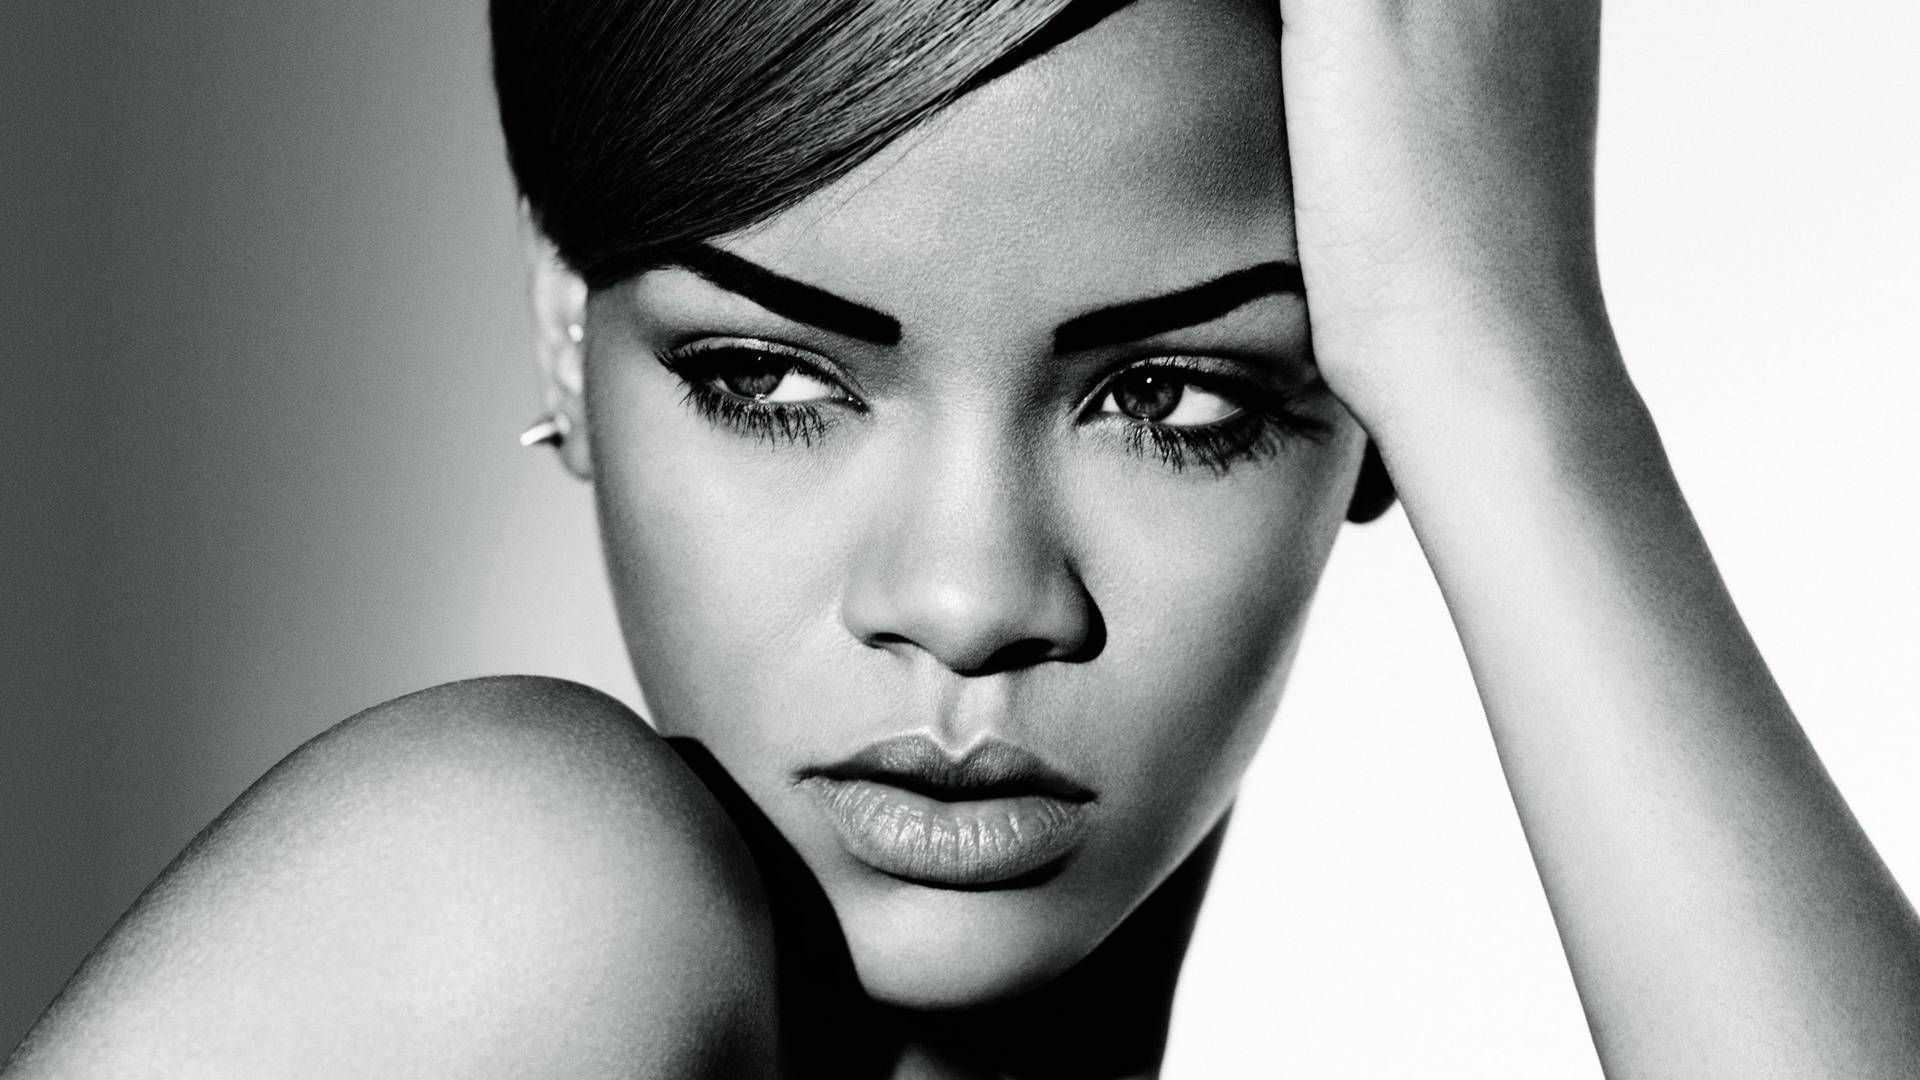 Free Download Rihanna Hd Wallpapers High Quality Wallpapers [1920x1080] For Your Desktop Mobile